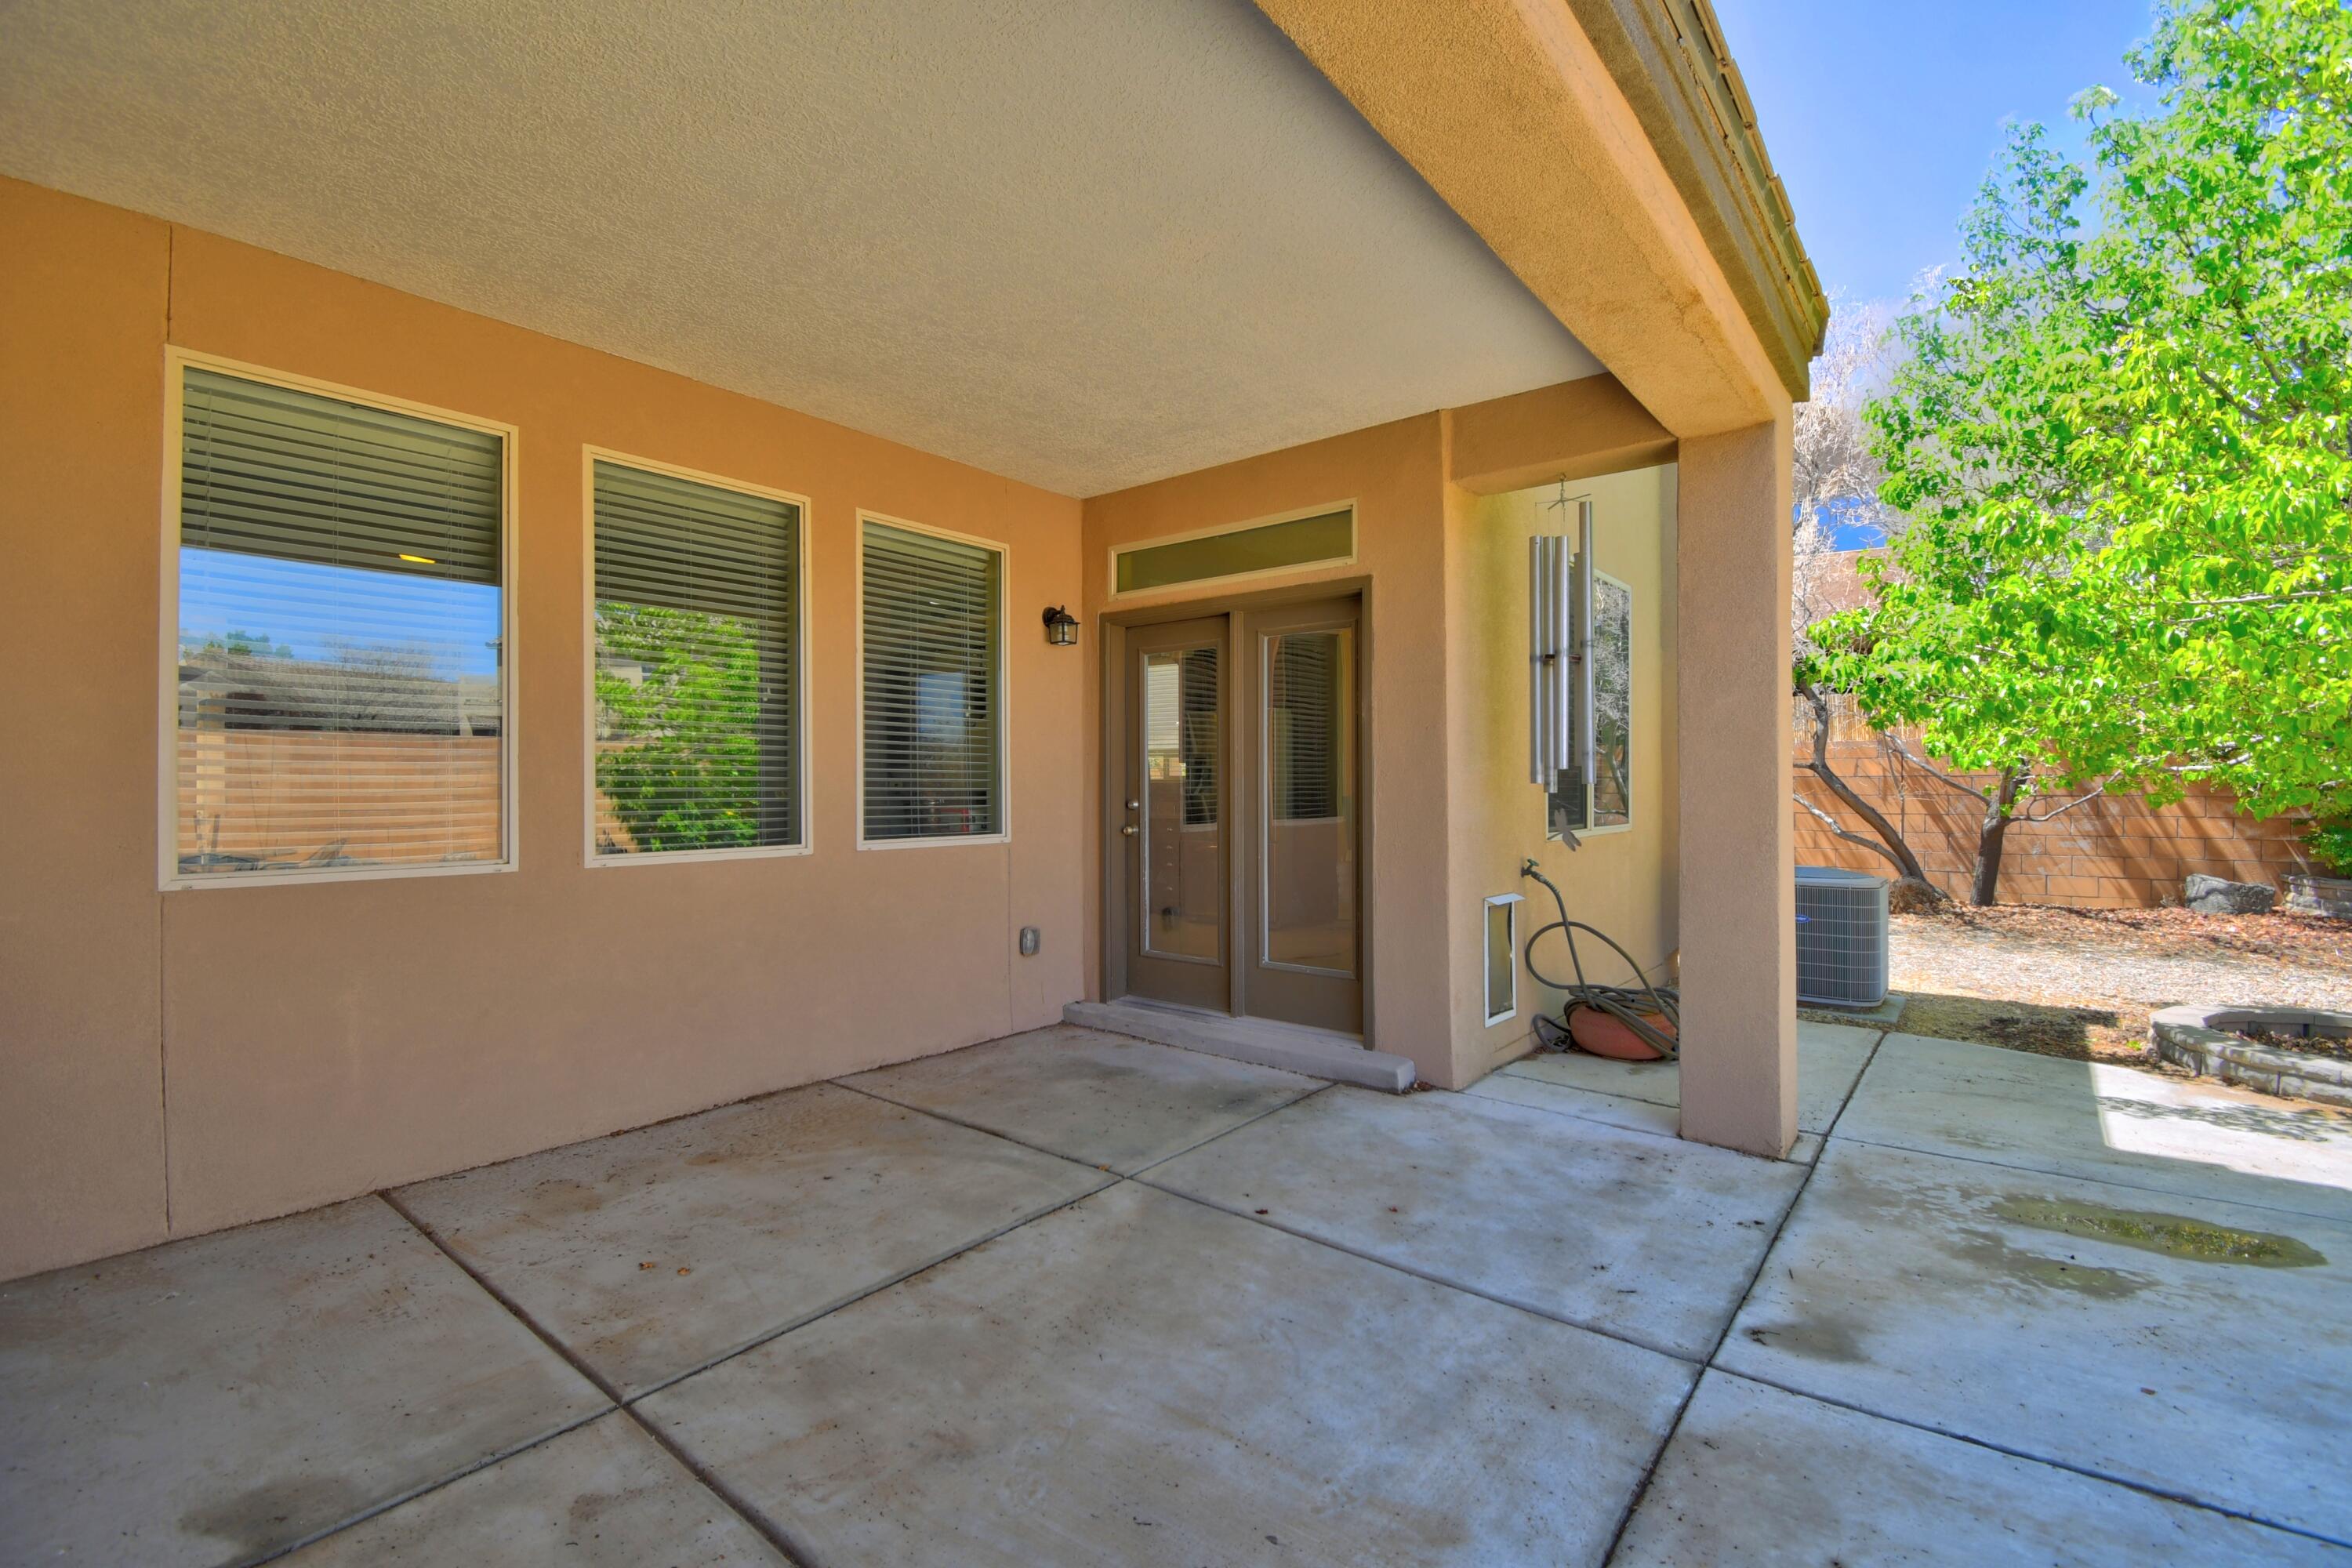 8627 Silk Tassel Road NW, Albuquerque, New Mexico 87120, 4 Bedrooms Bedrooms, ,2 BathroomsBathrooms,Residential,For Sale,8627 Silk Tassel Road NW,1060460